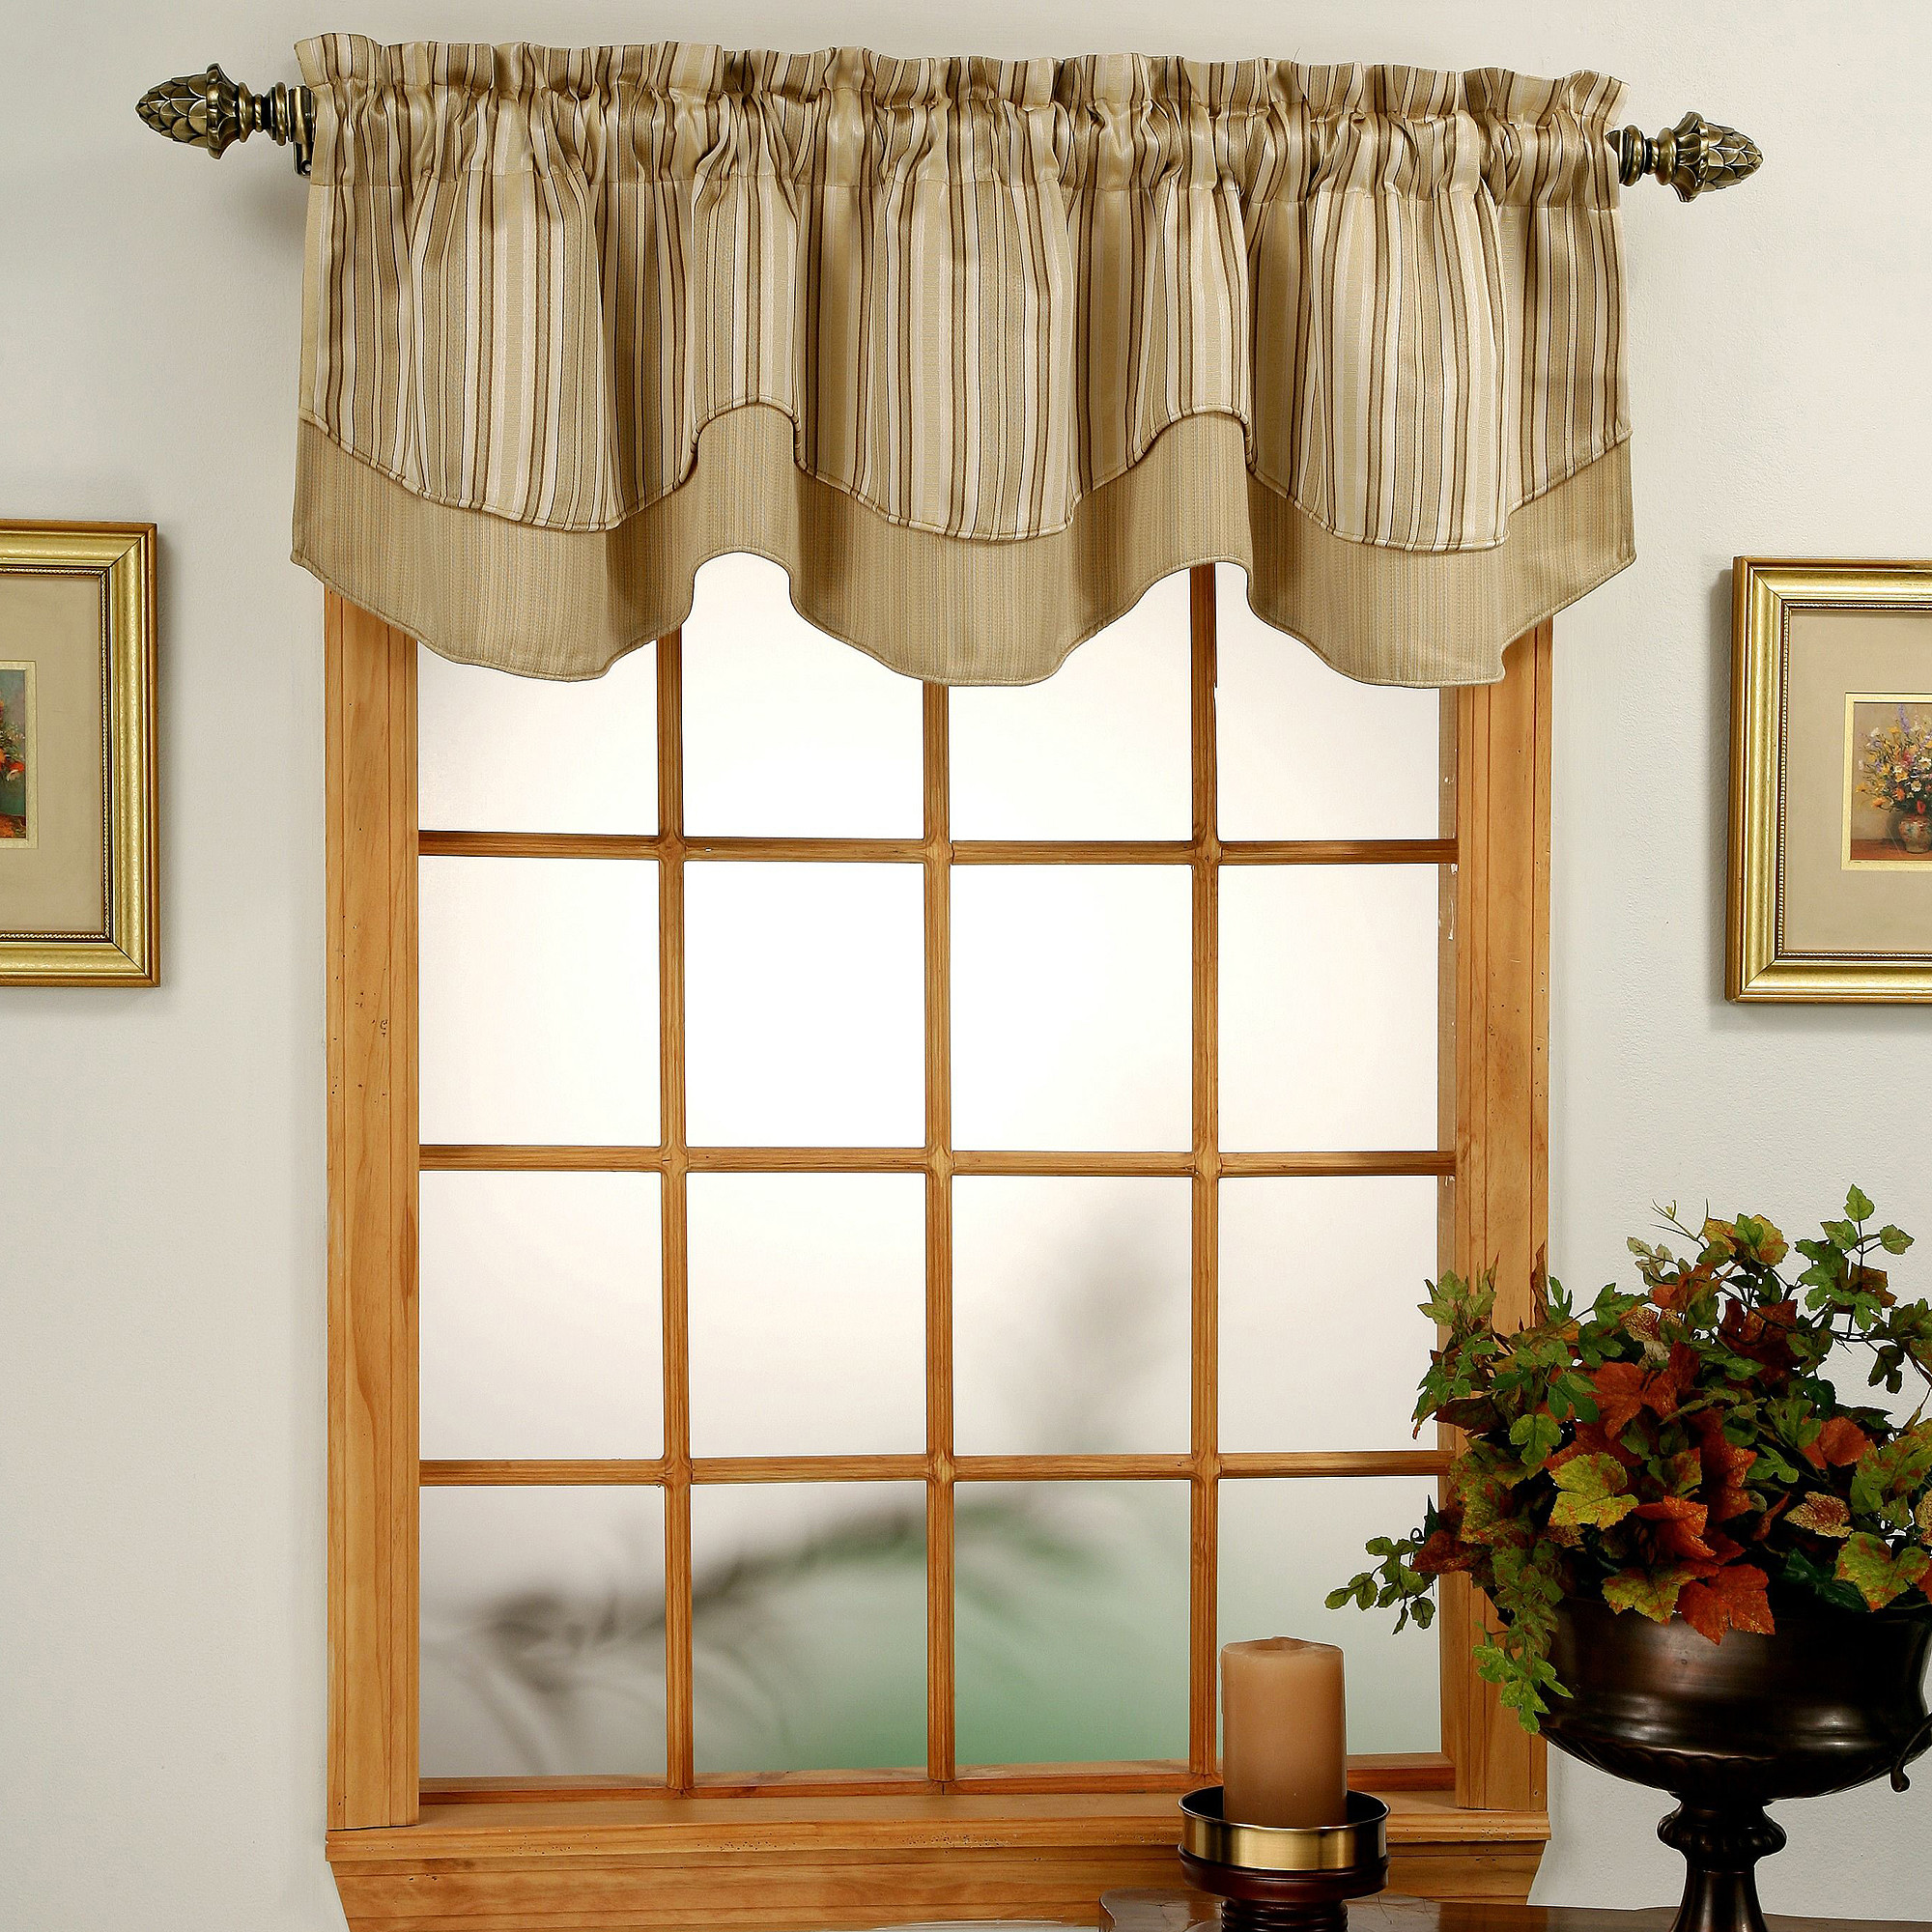 Window Valance Ideas Living Room Fresh Curtain Cute Living Room Valances For Your Home Of Window Valance Ideas Living Room 